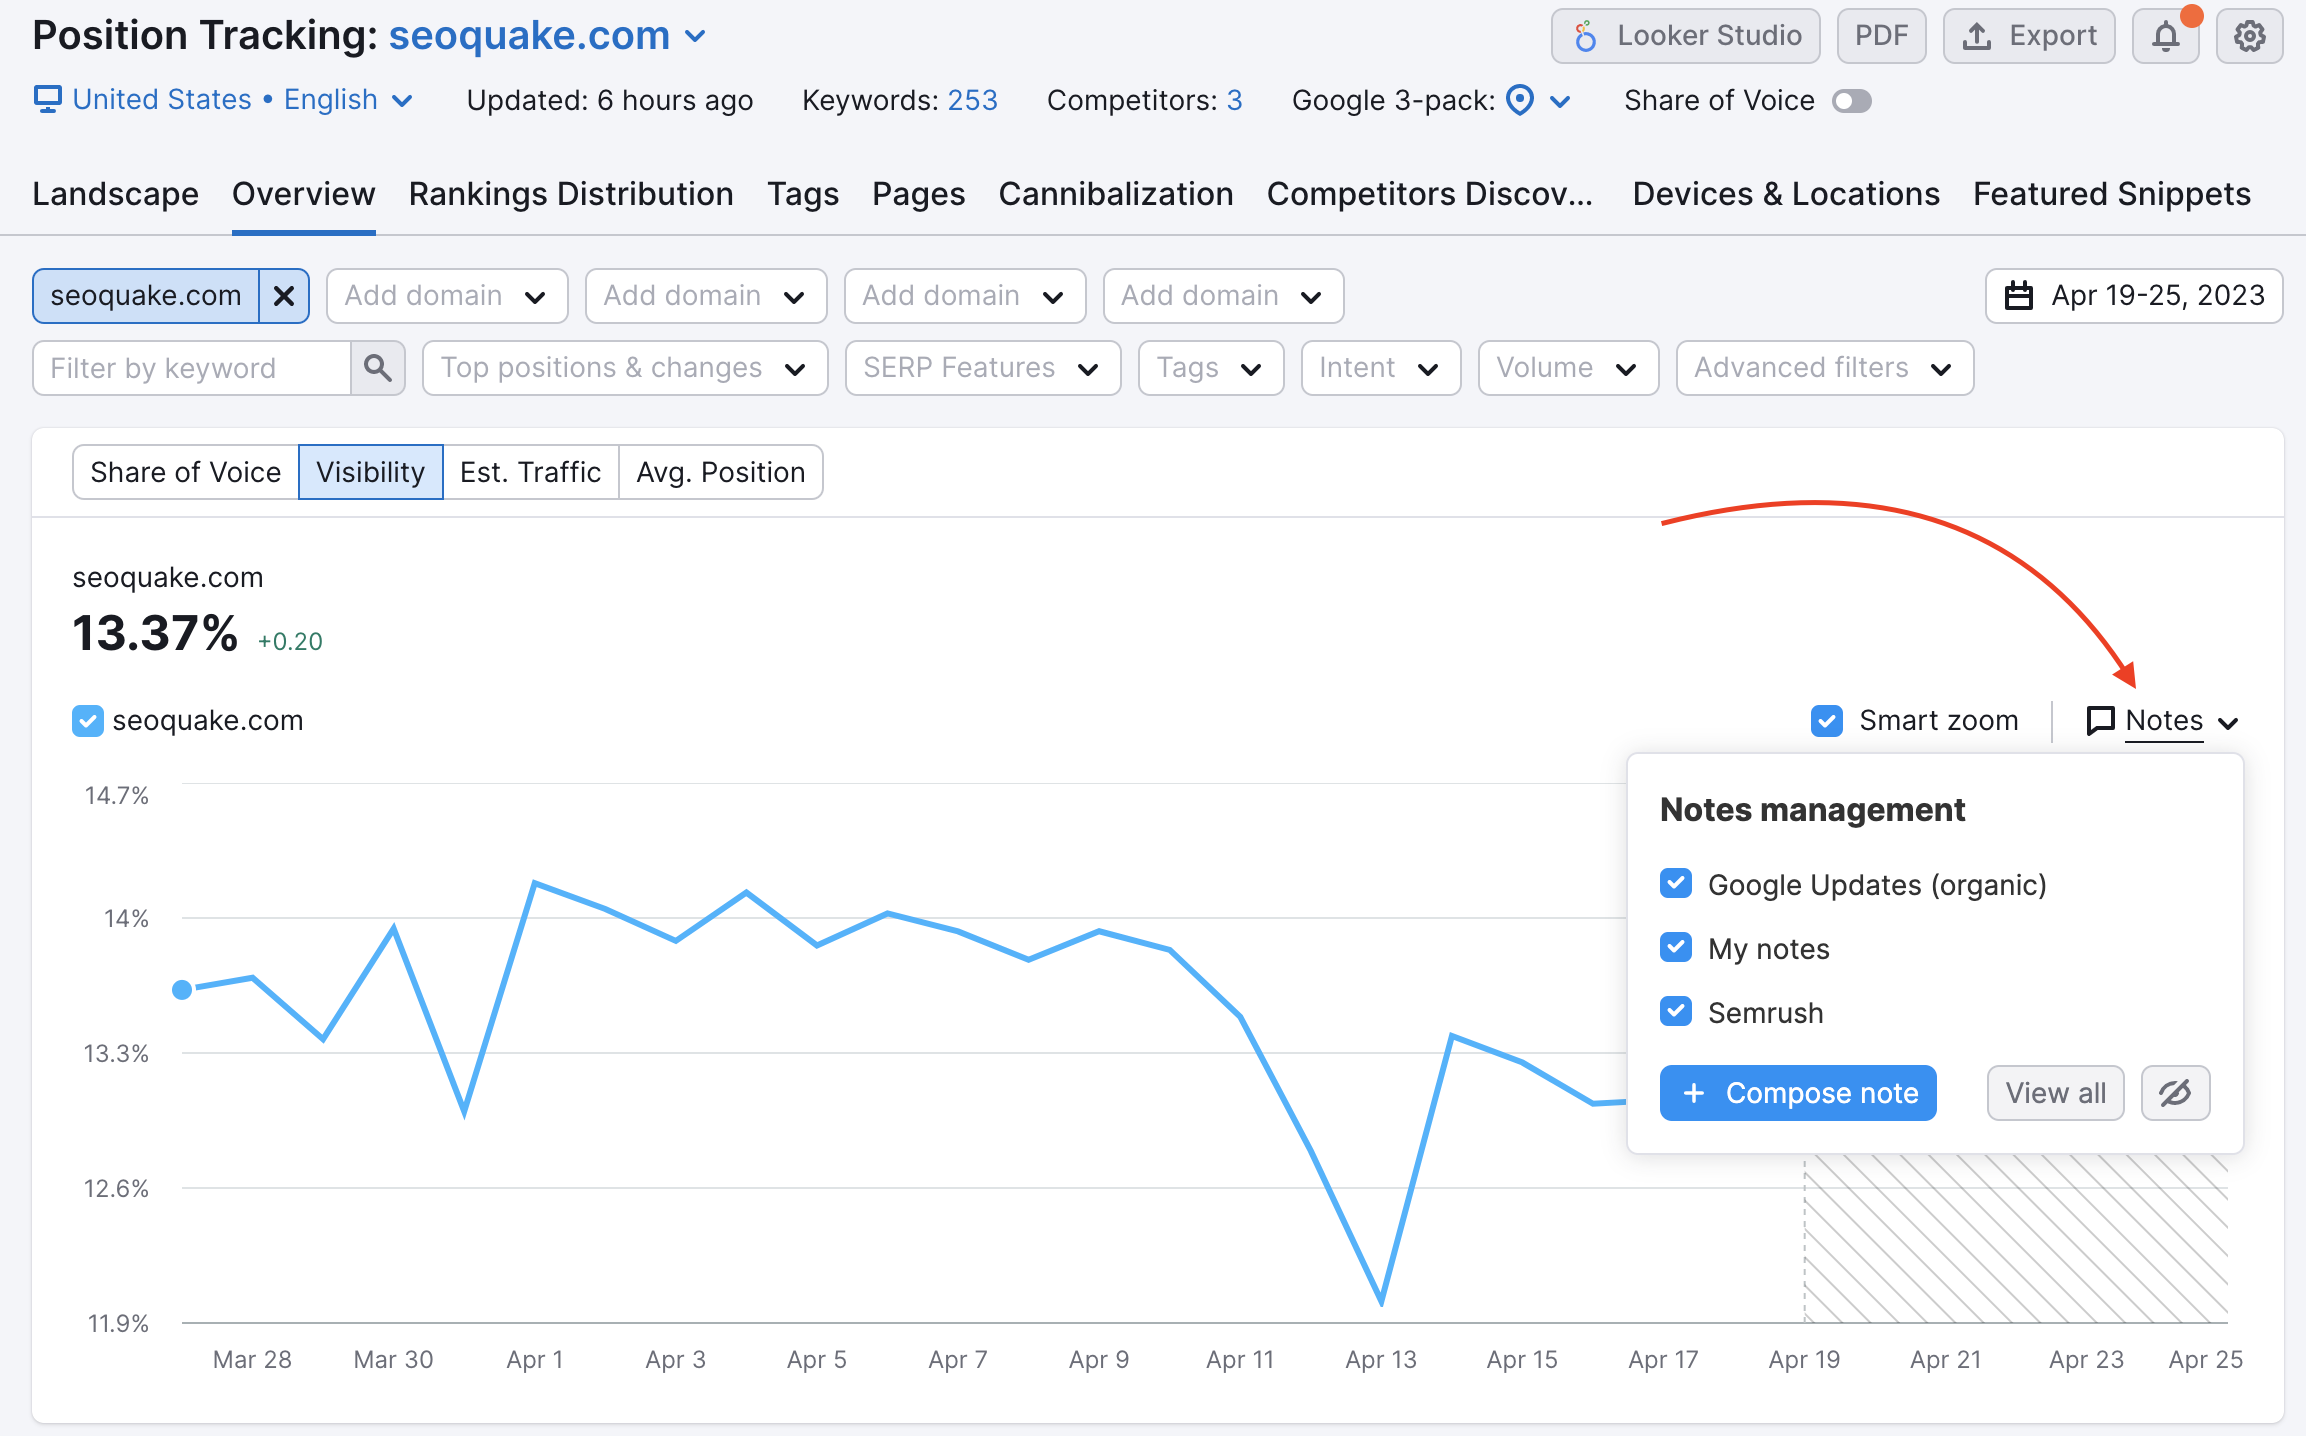 Position tracking Overview tab. A red arrow point to the notes management button on the right side of the visibility graph. The options show: Google updates (organic), my notes, Semrush, compose note, view all, hide. 